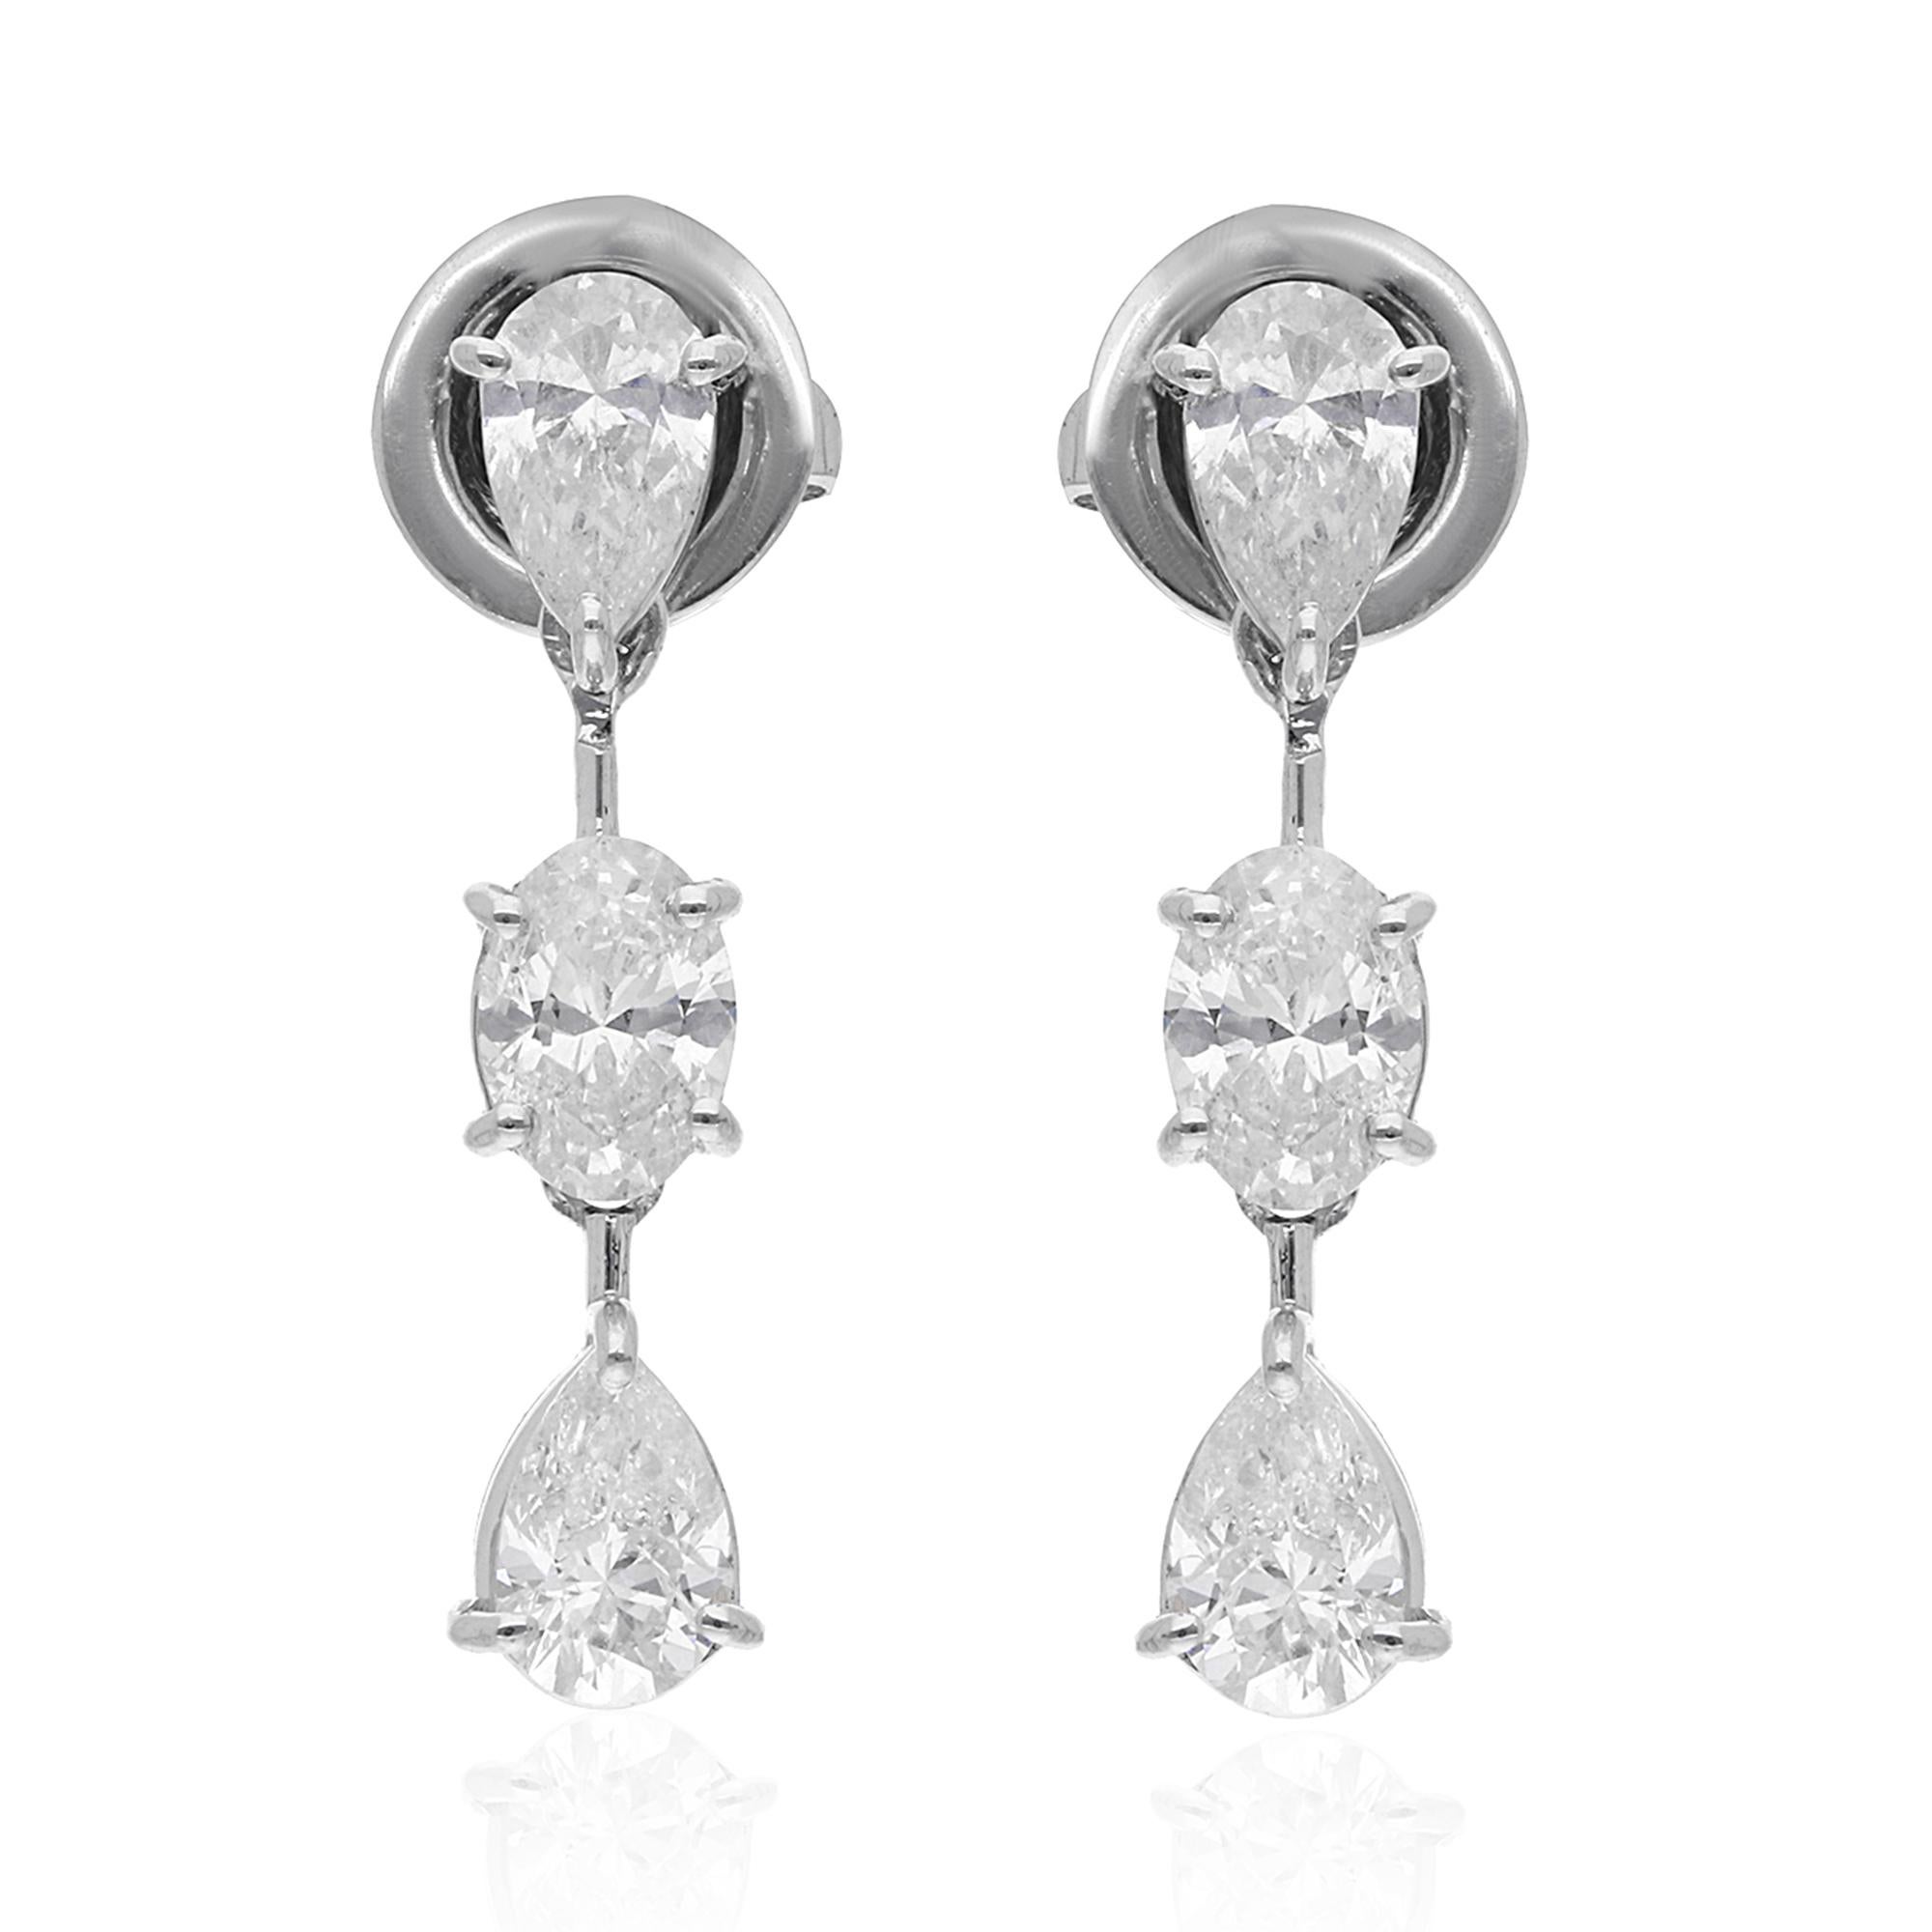 Crafted with precision and attention to detail, the earrings feature a sleek and modern design that exudes sophistication. The 14 Karat White Gold setting provides the perfect complement to the dazzling diamonds, with its polished finish and